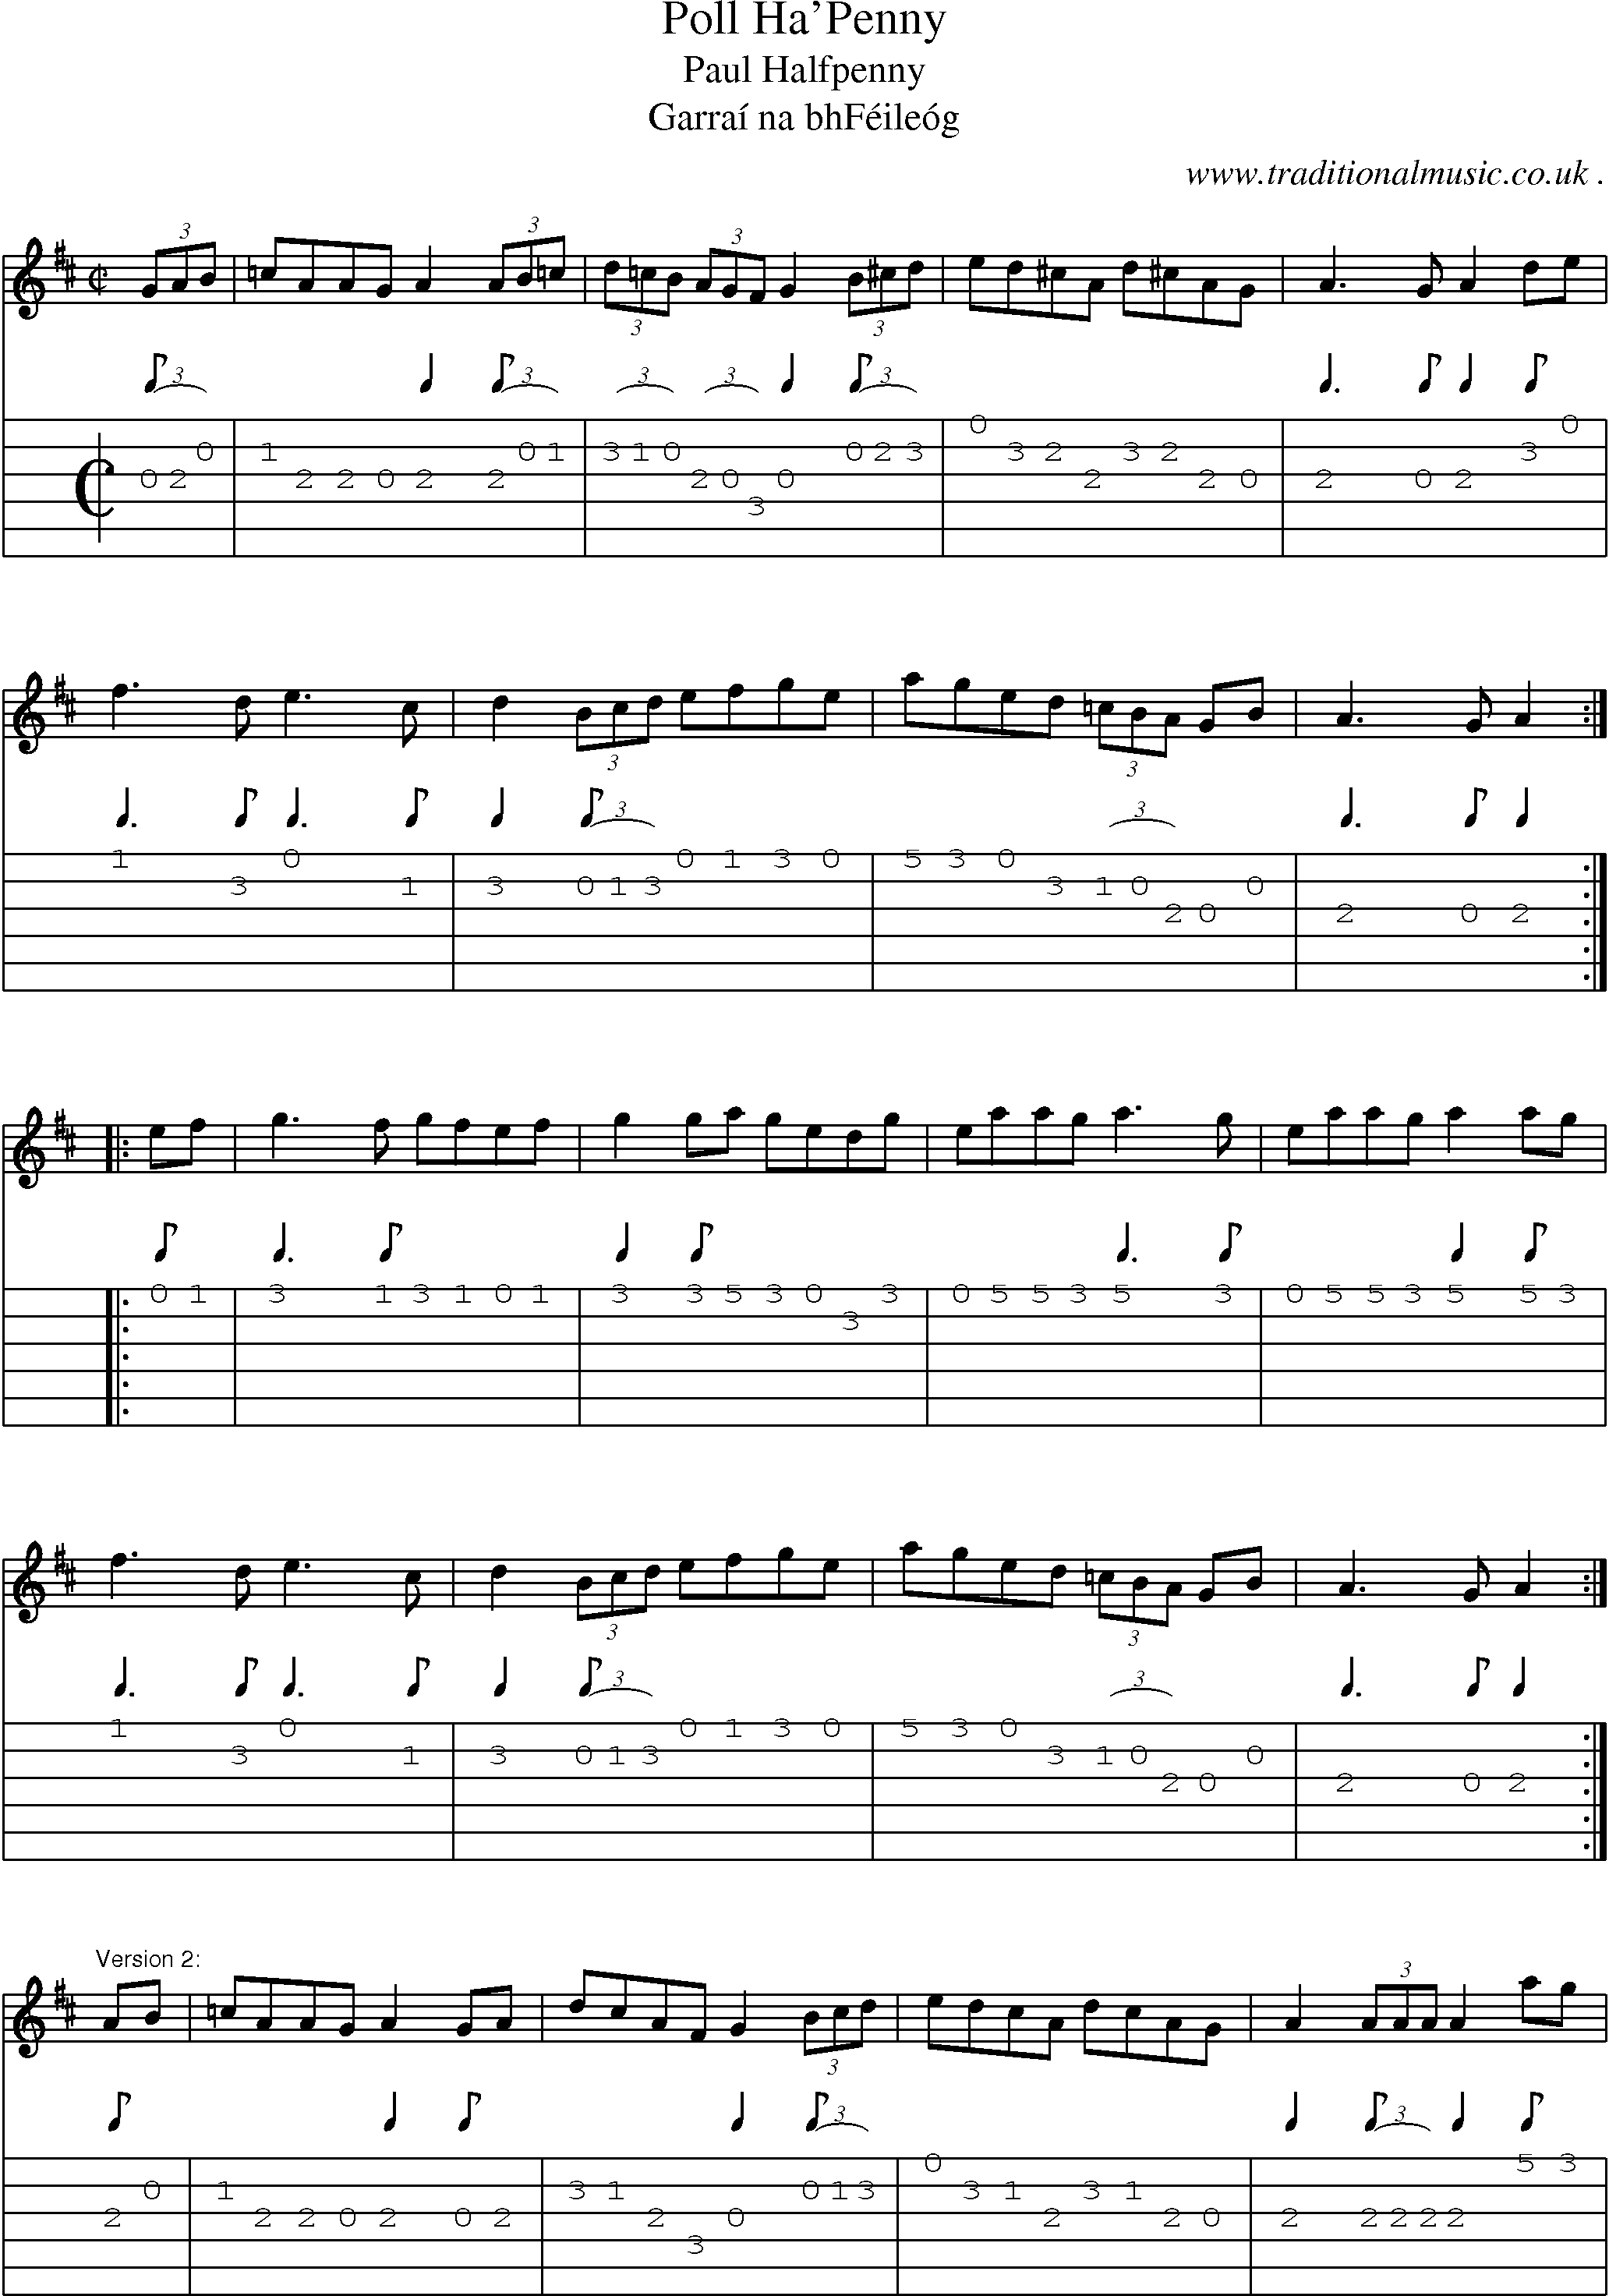 Sheet-Music and Guitar Tabs for Poll Hapenny